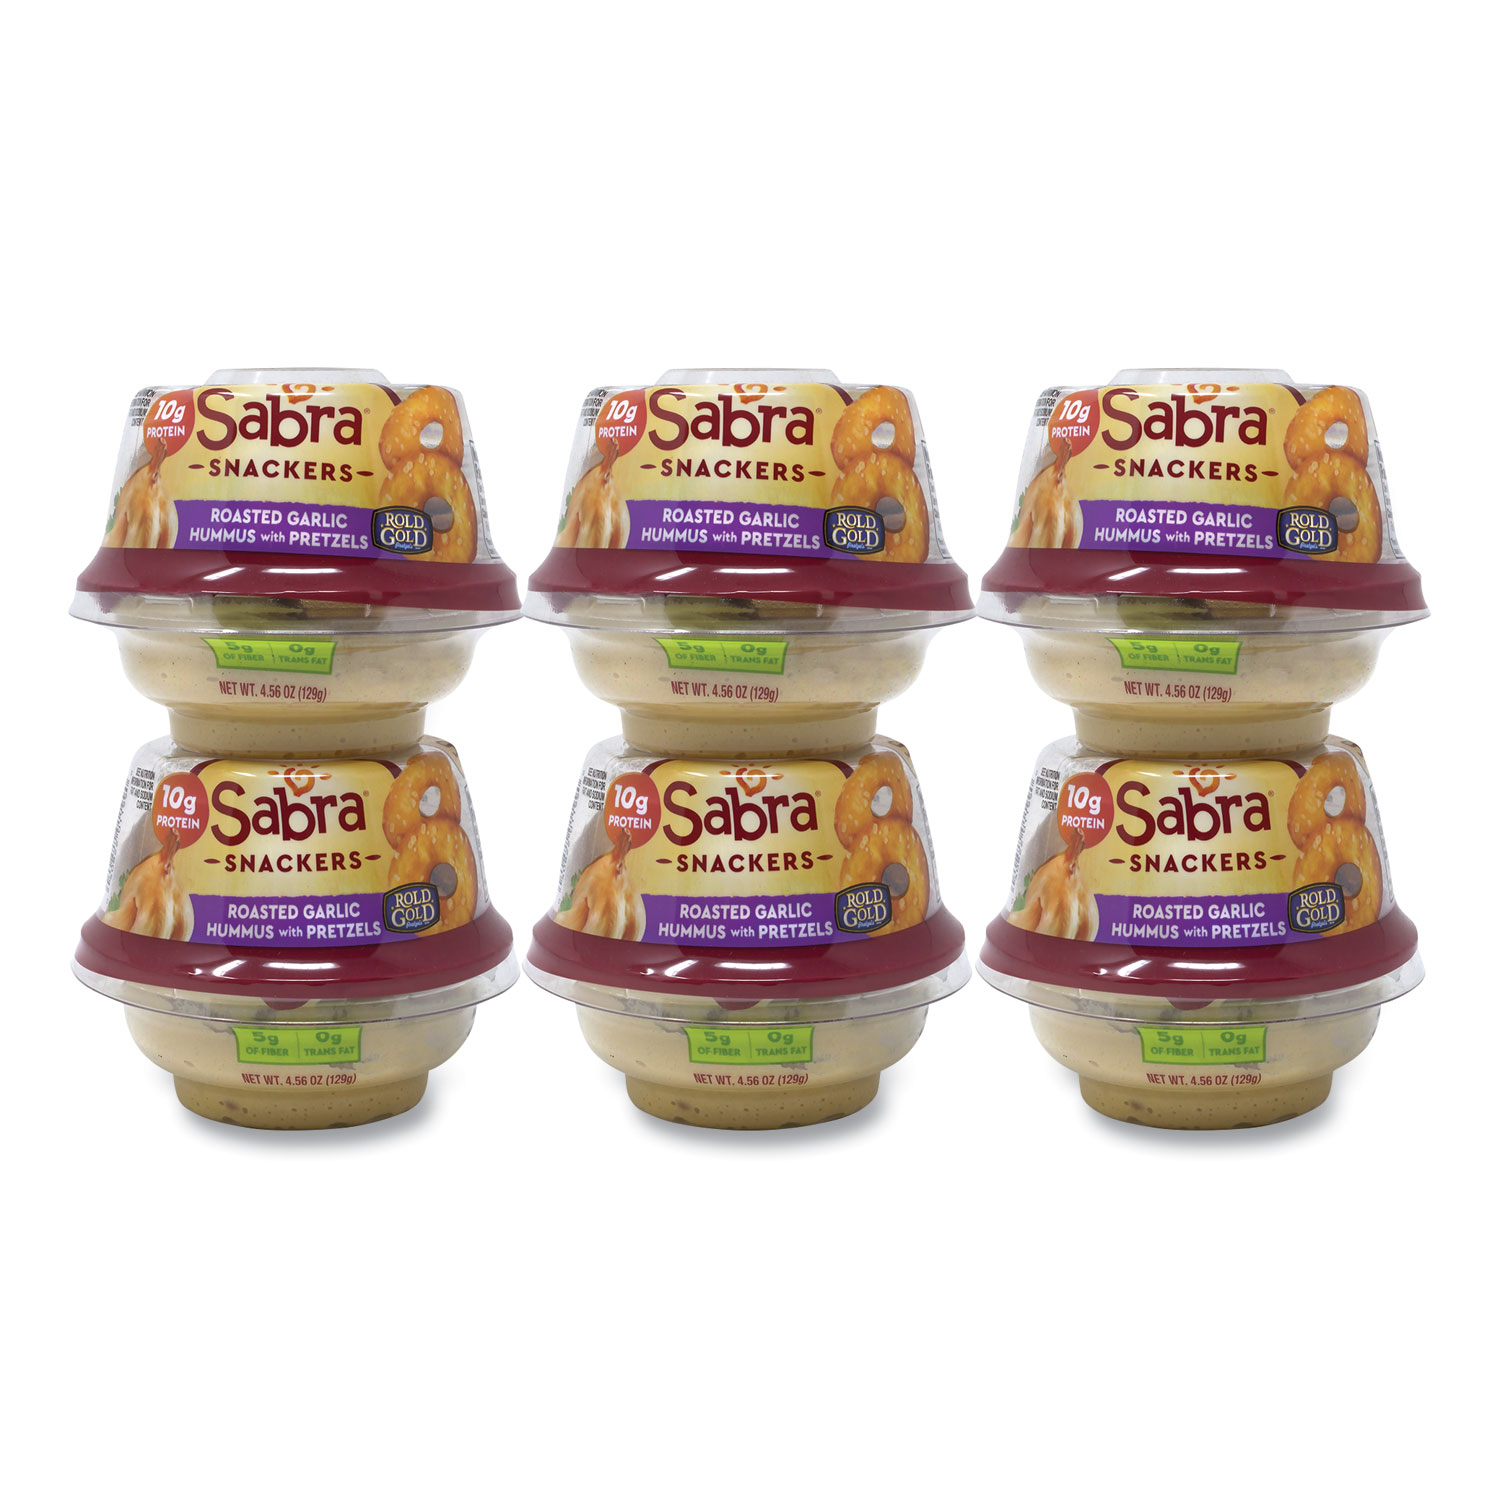  Sabra 30080 Classic Hummus with Pretzel, 4.56 oz Cup, 6 Cups/Pack, Free Delivery in 1-4 Business Days (GRR90200452) 